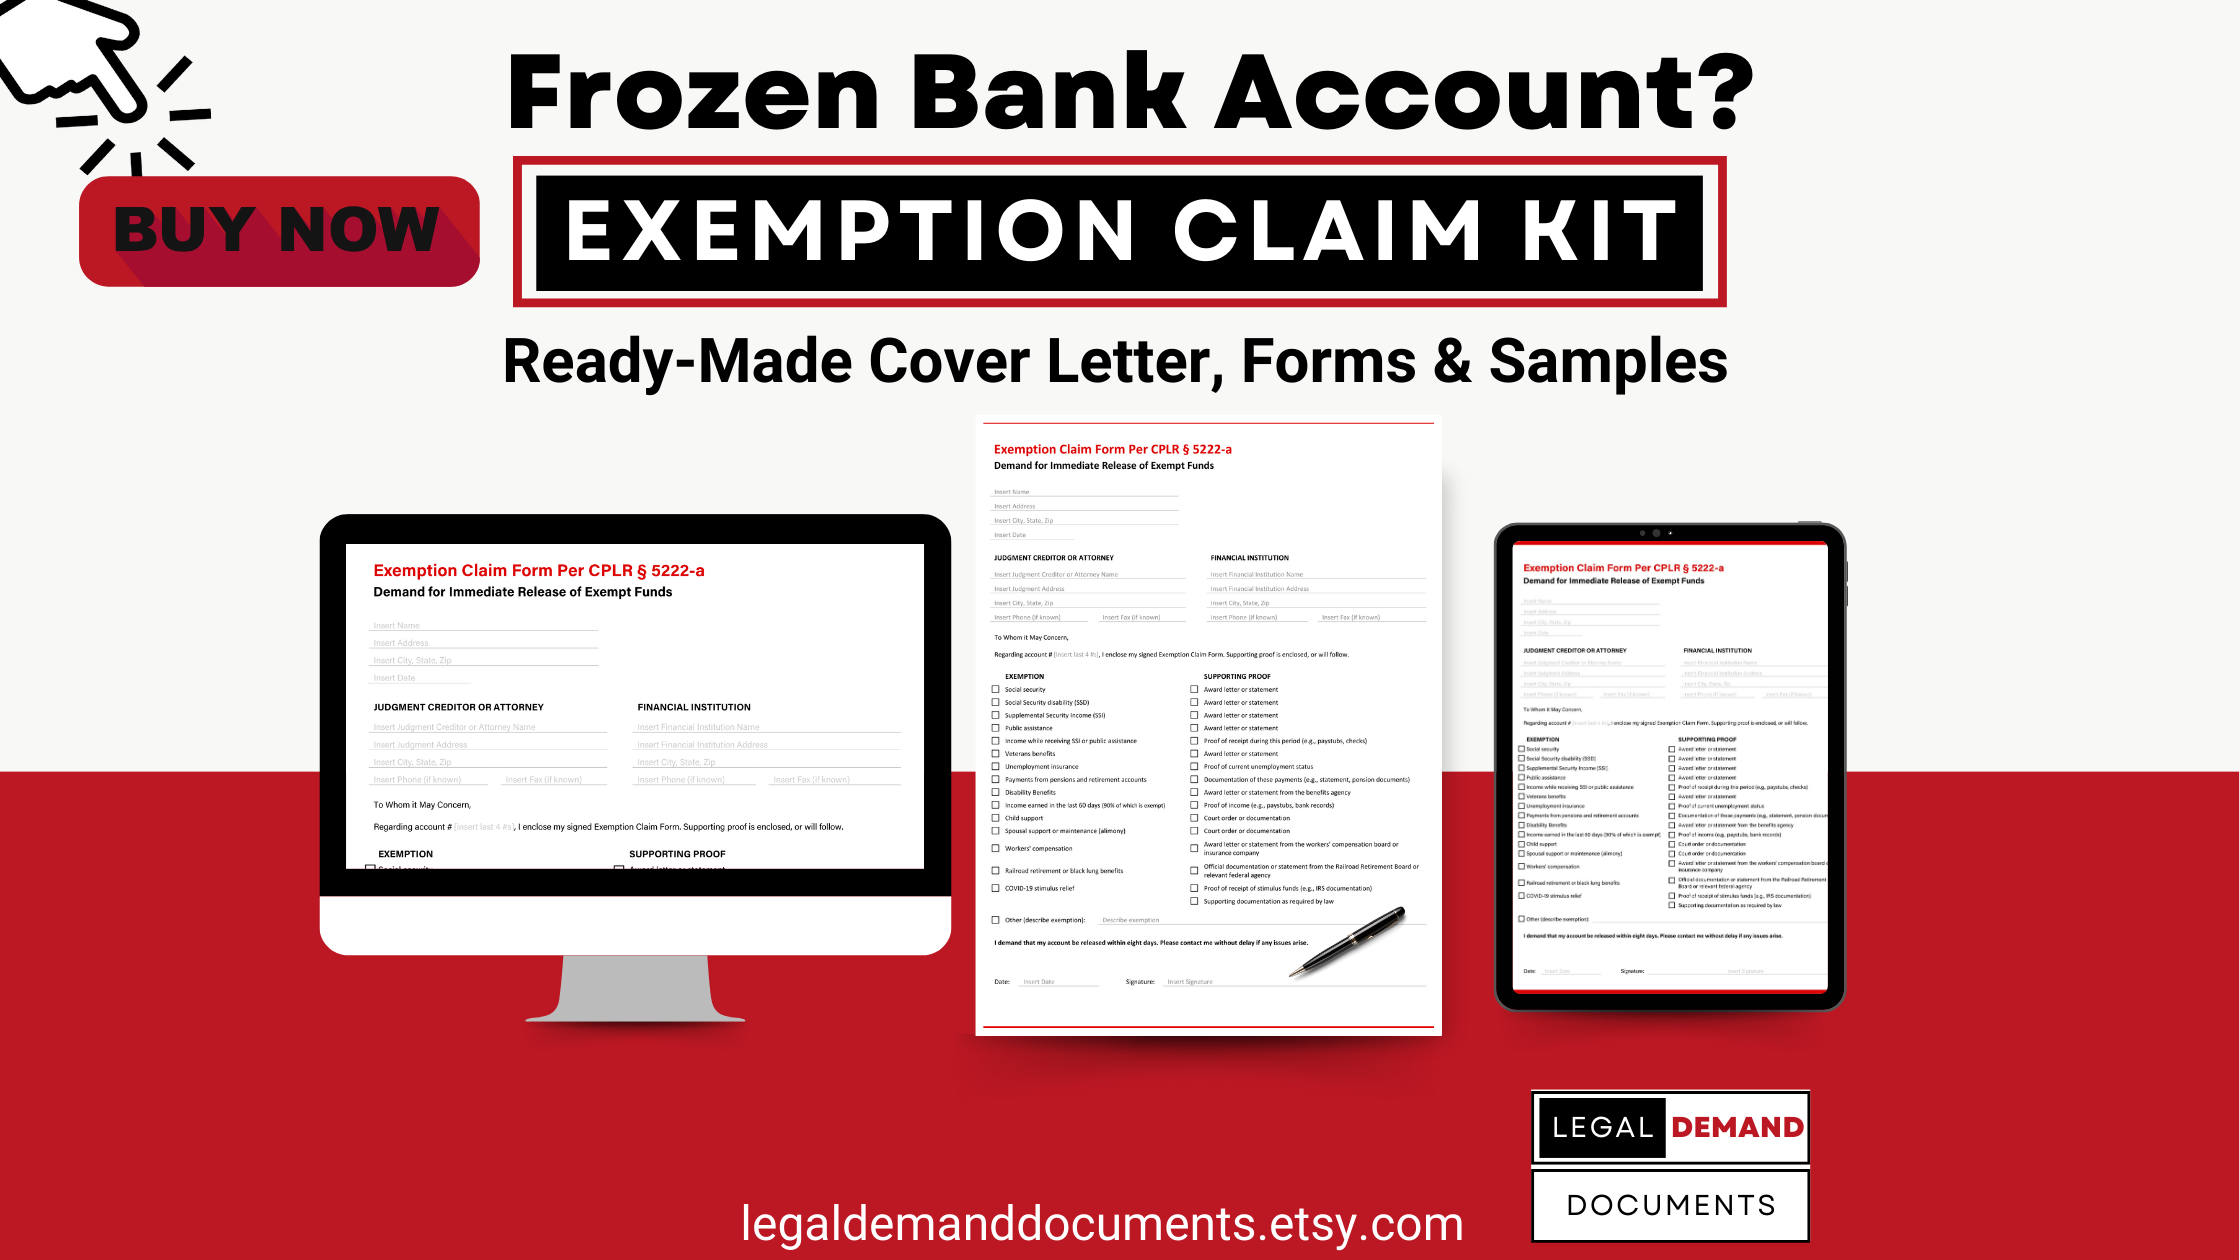 A graphic showing a fillable PDF and fillable Word form document of an exemption claim form and cover letter to unfreeze bank holds under New York CPLR § 5222-a created by a consumer debt-defense lawyer, Jesse Langel of The Langel Firm.